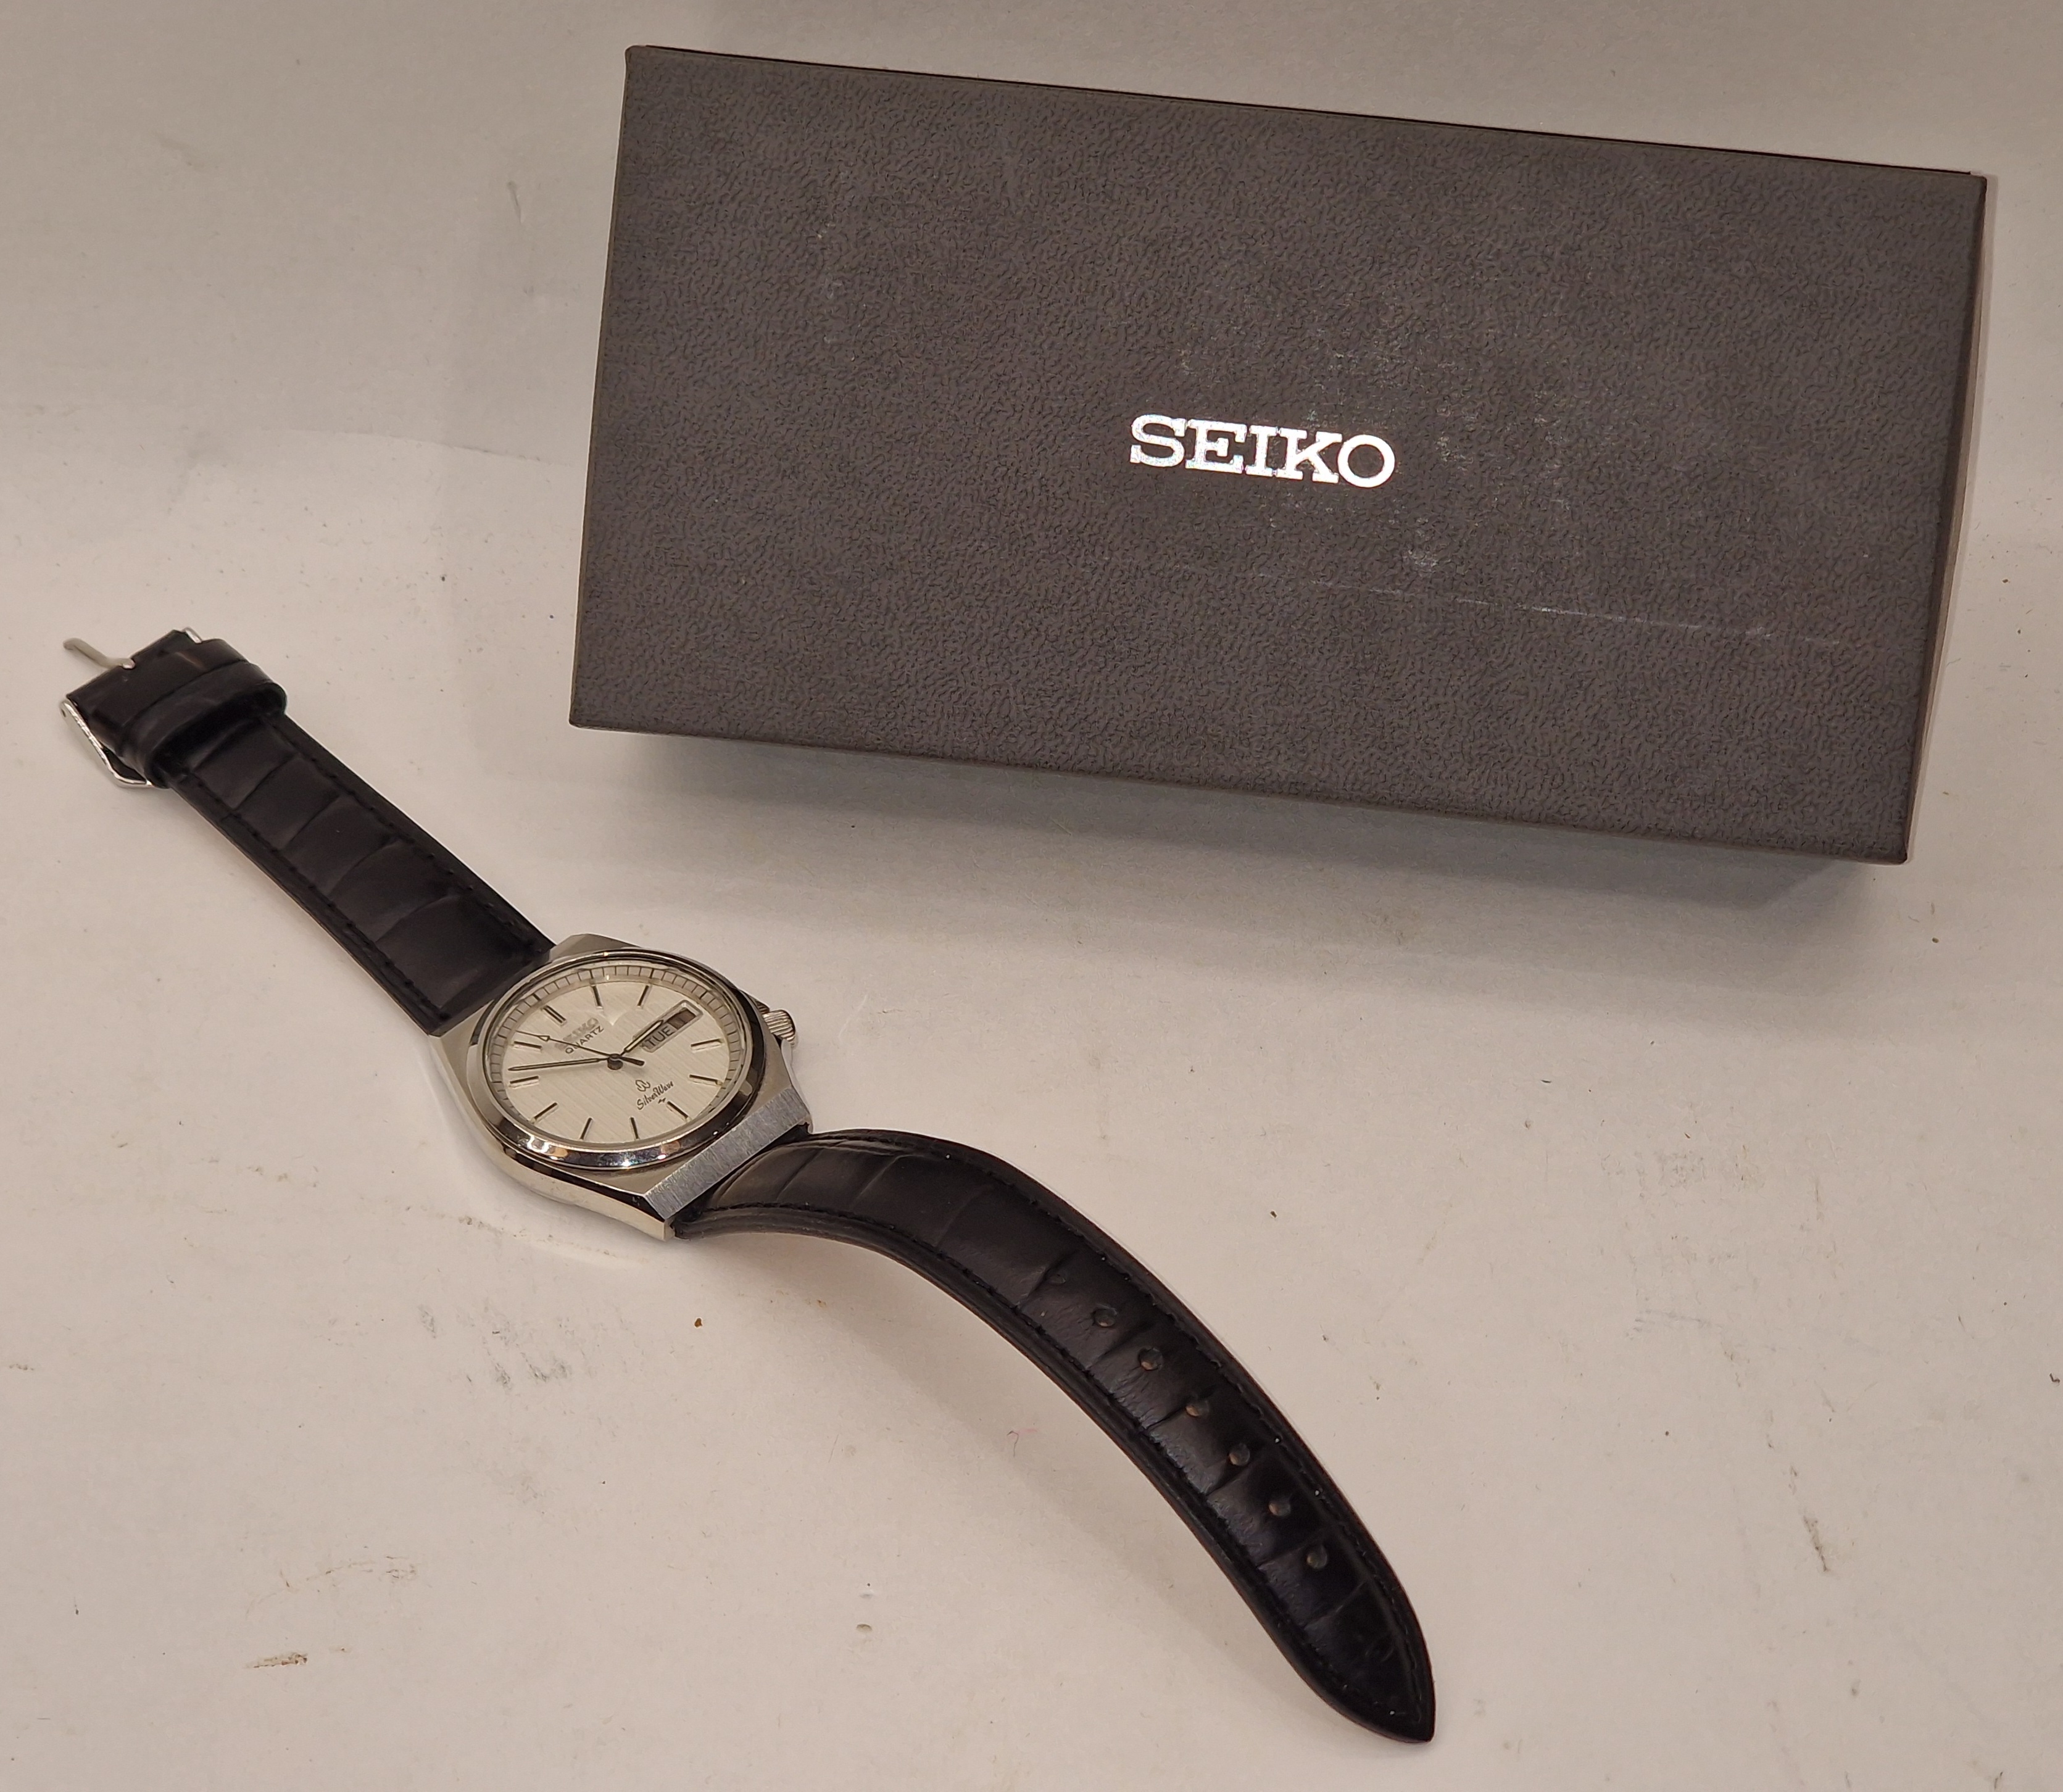 Vintage Seiko Silver Wave Gents Quartz Watch ref:7123-8370, serial number  dates this watch to April